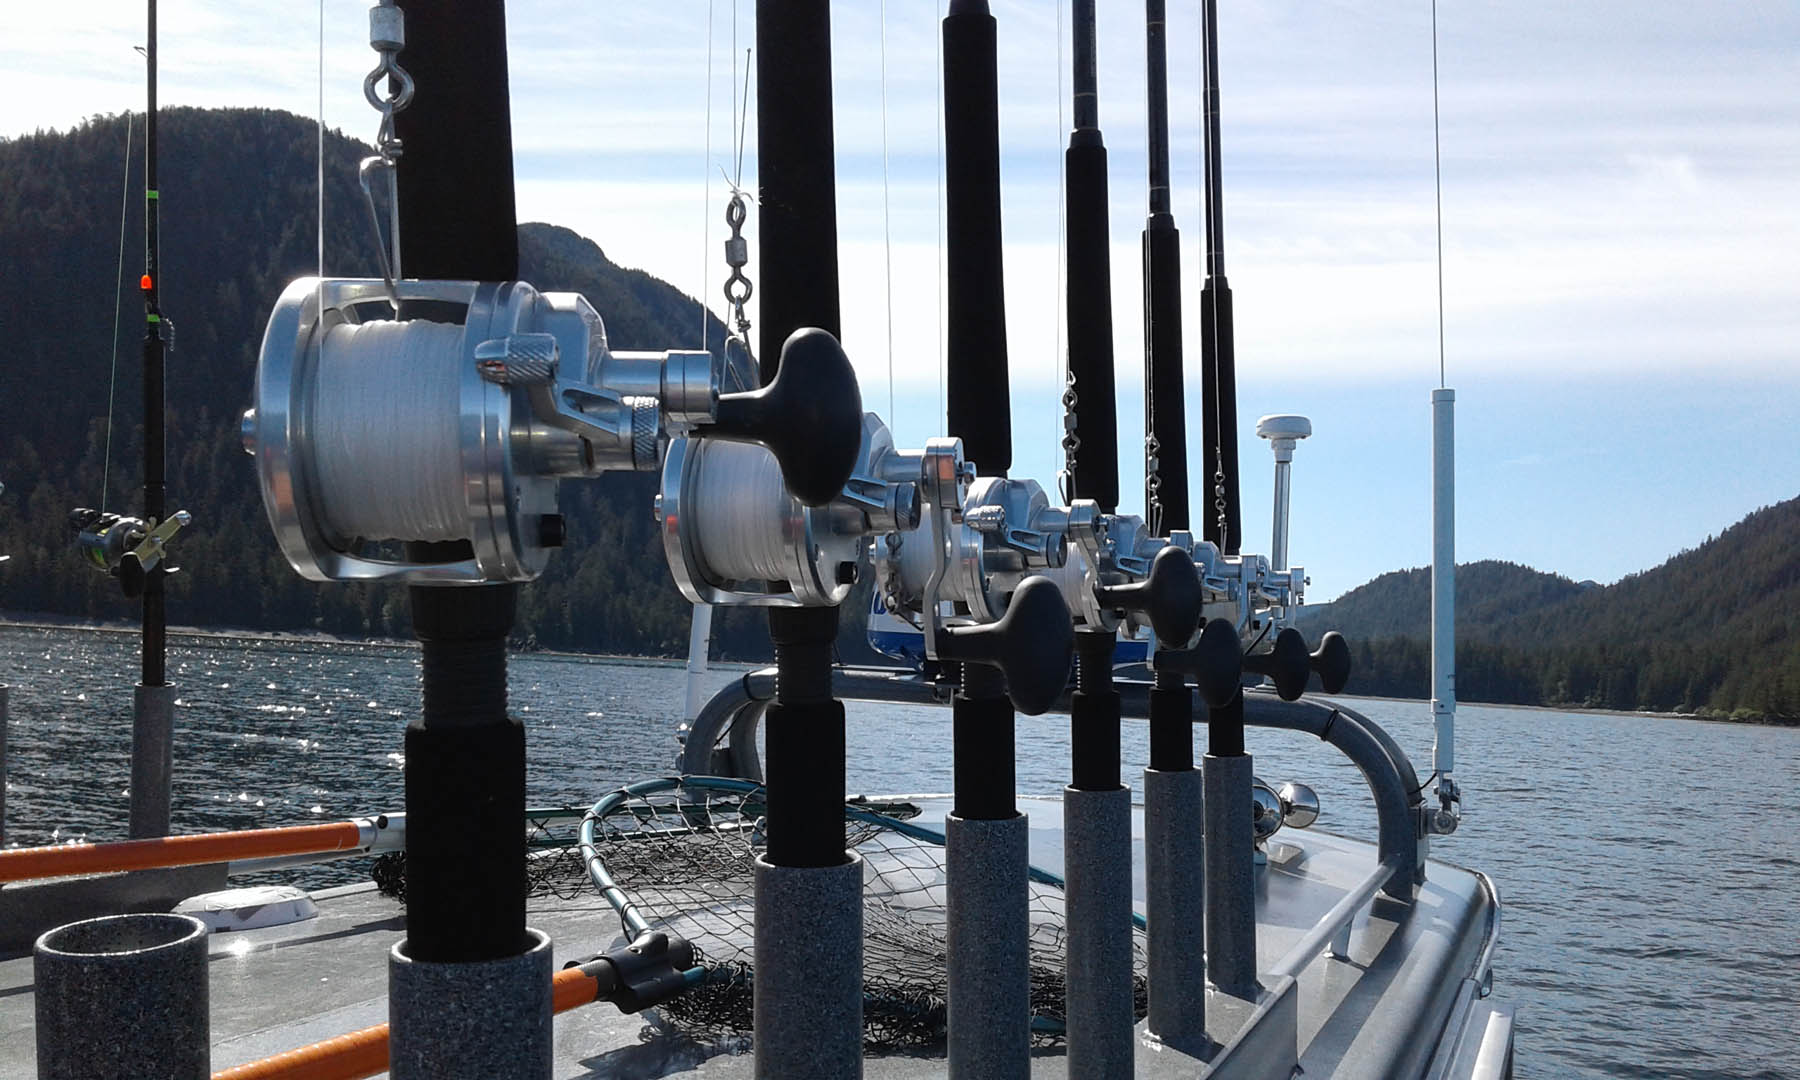 close up of fishing rods on the boat.